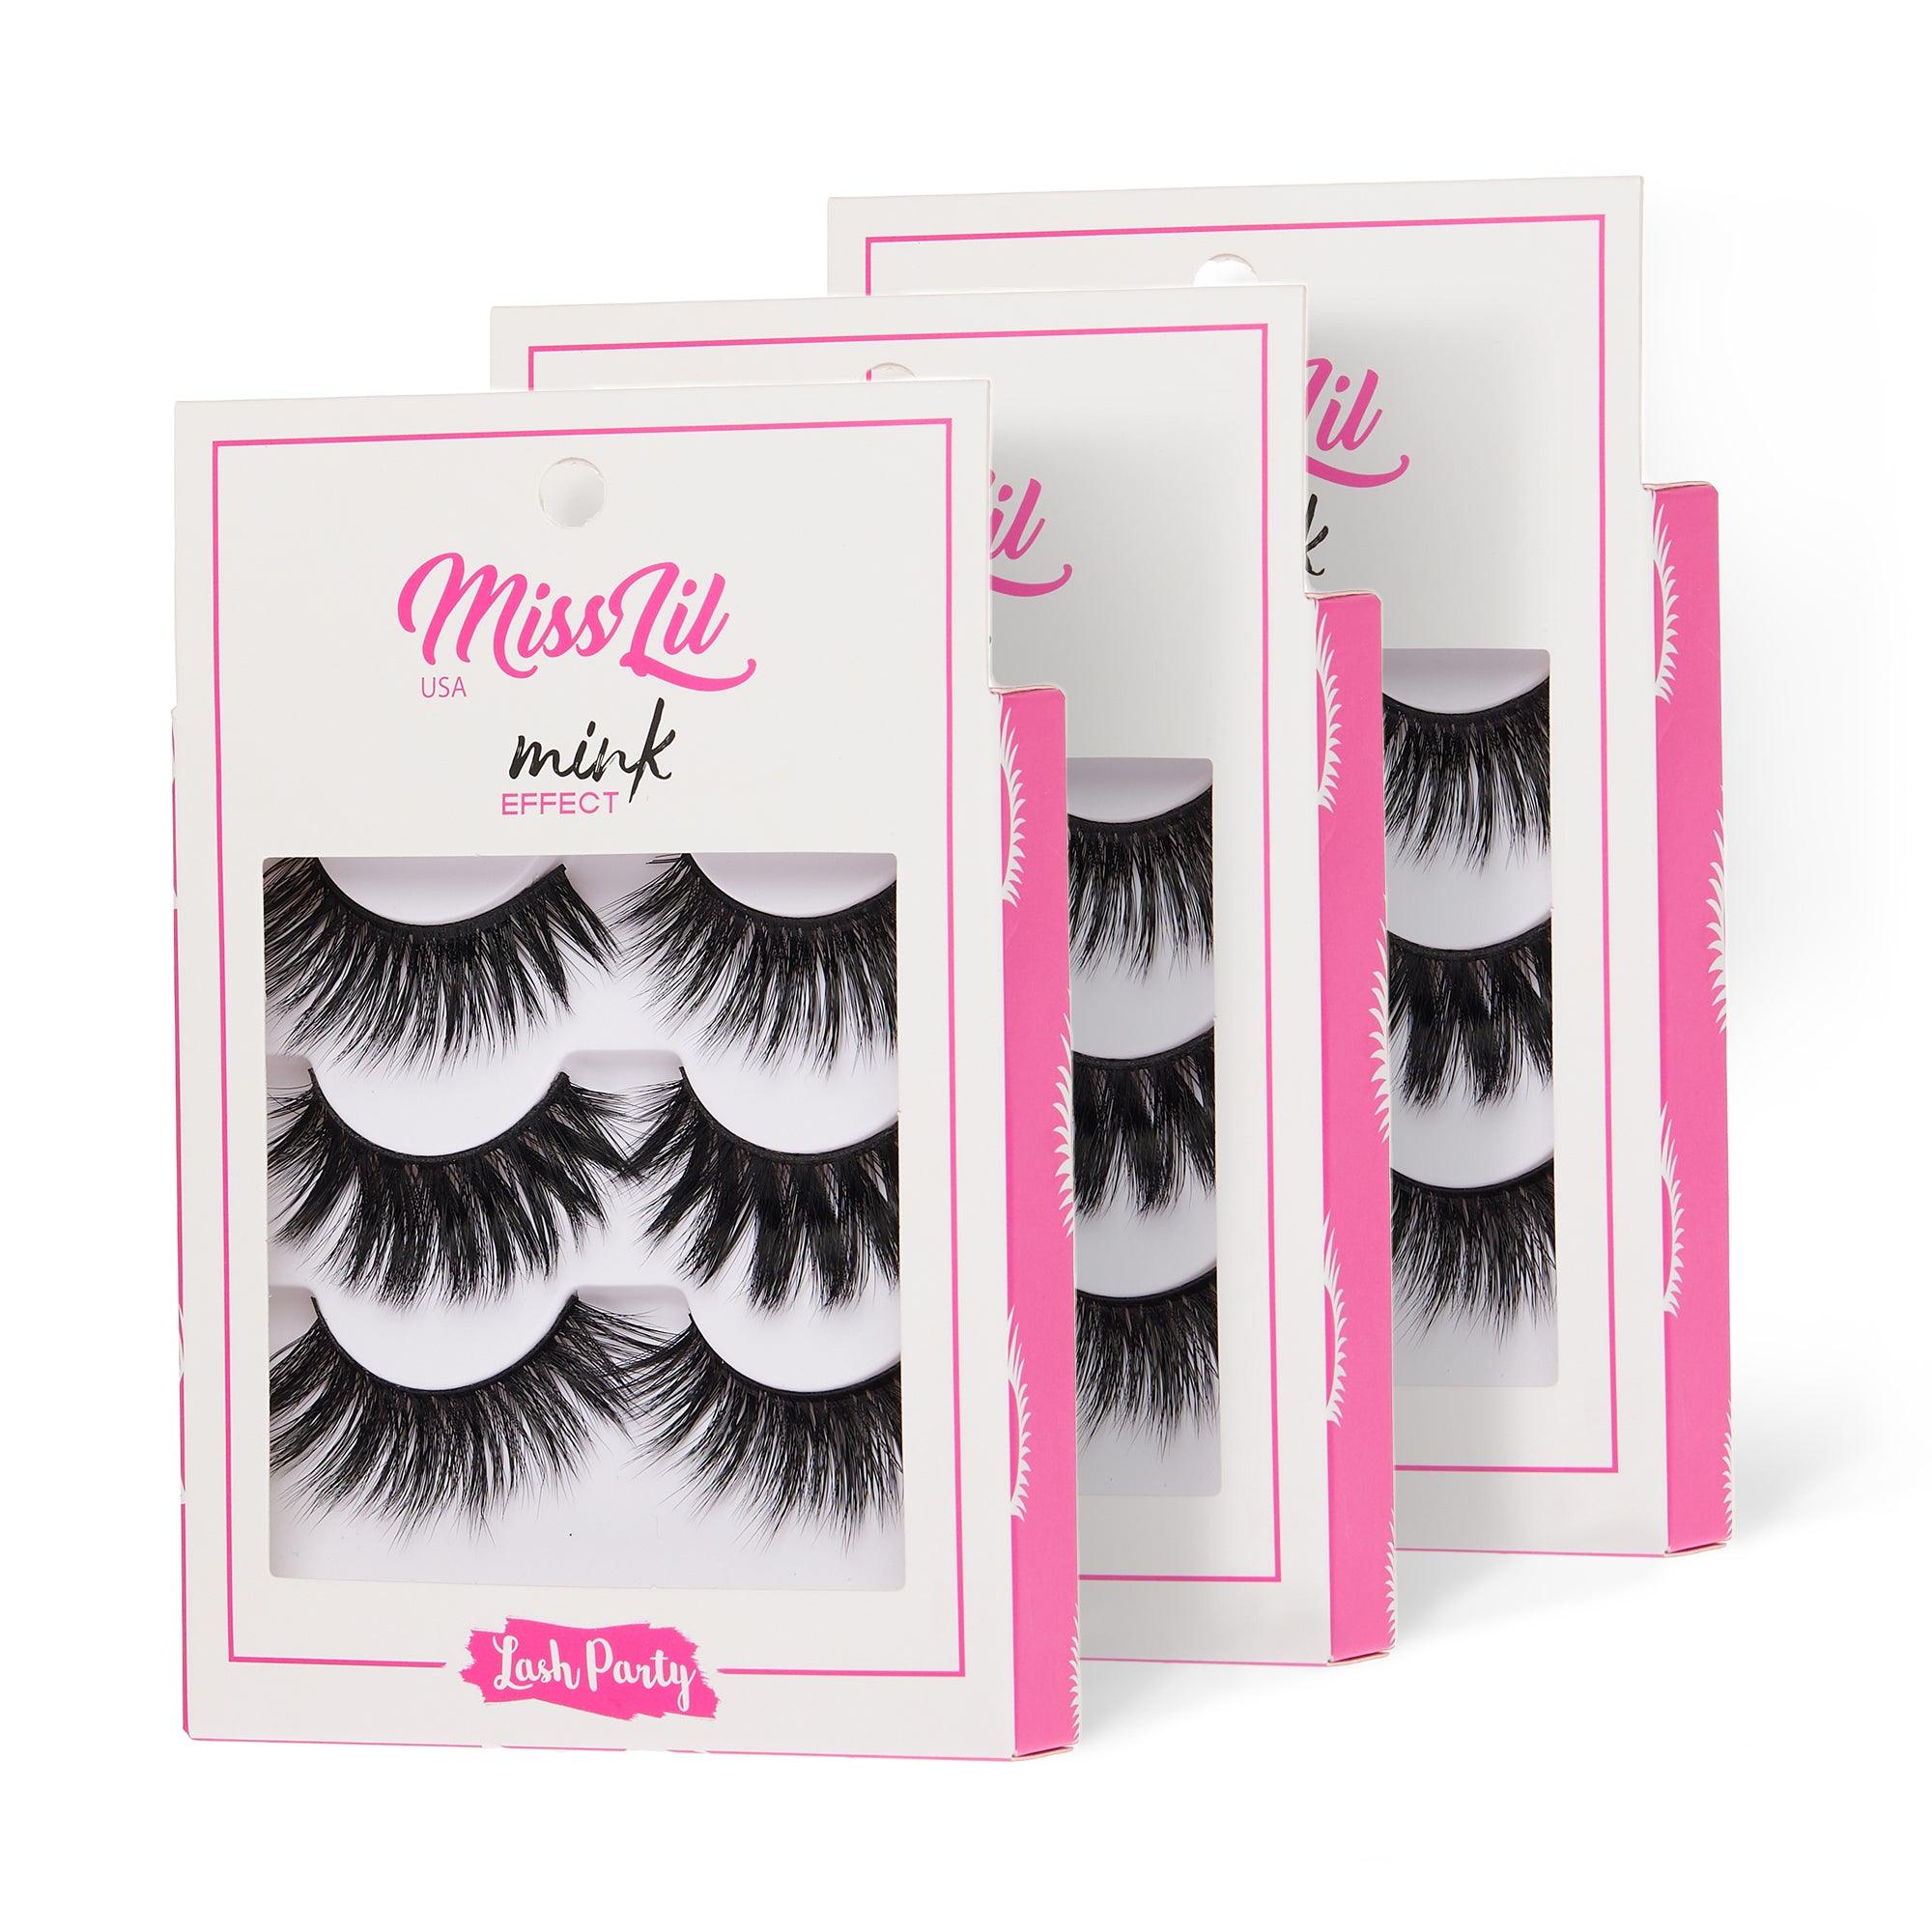 3-Pair Faux Mink Effect Eyelashes - Lash Party Collection #26 - Pack of 3